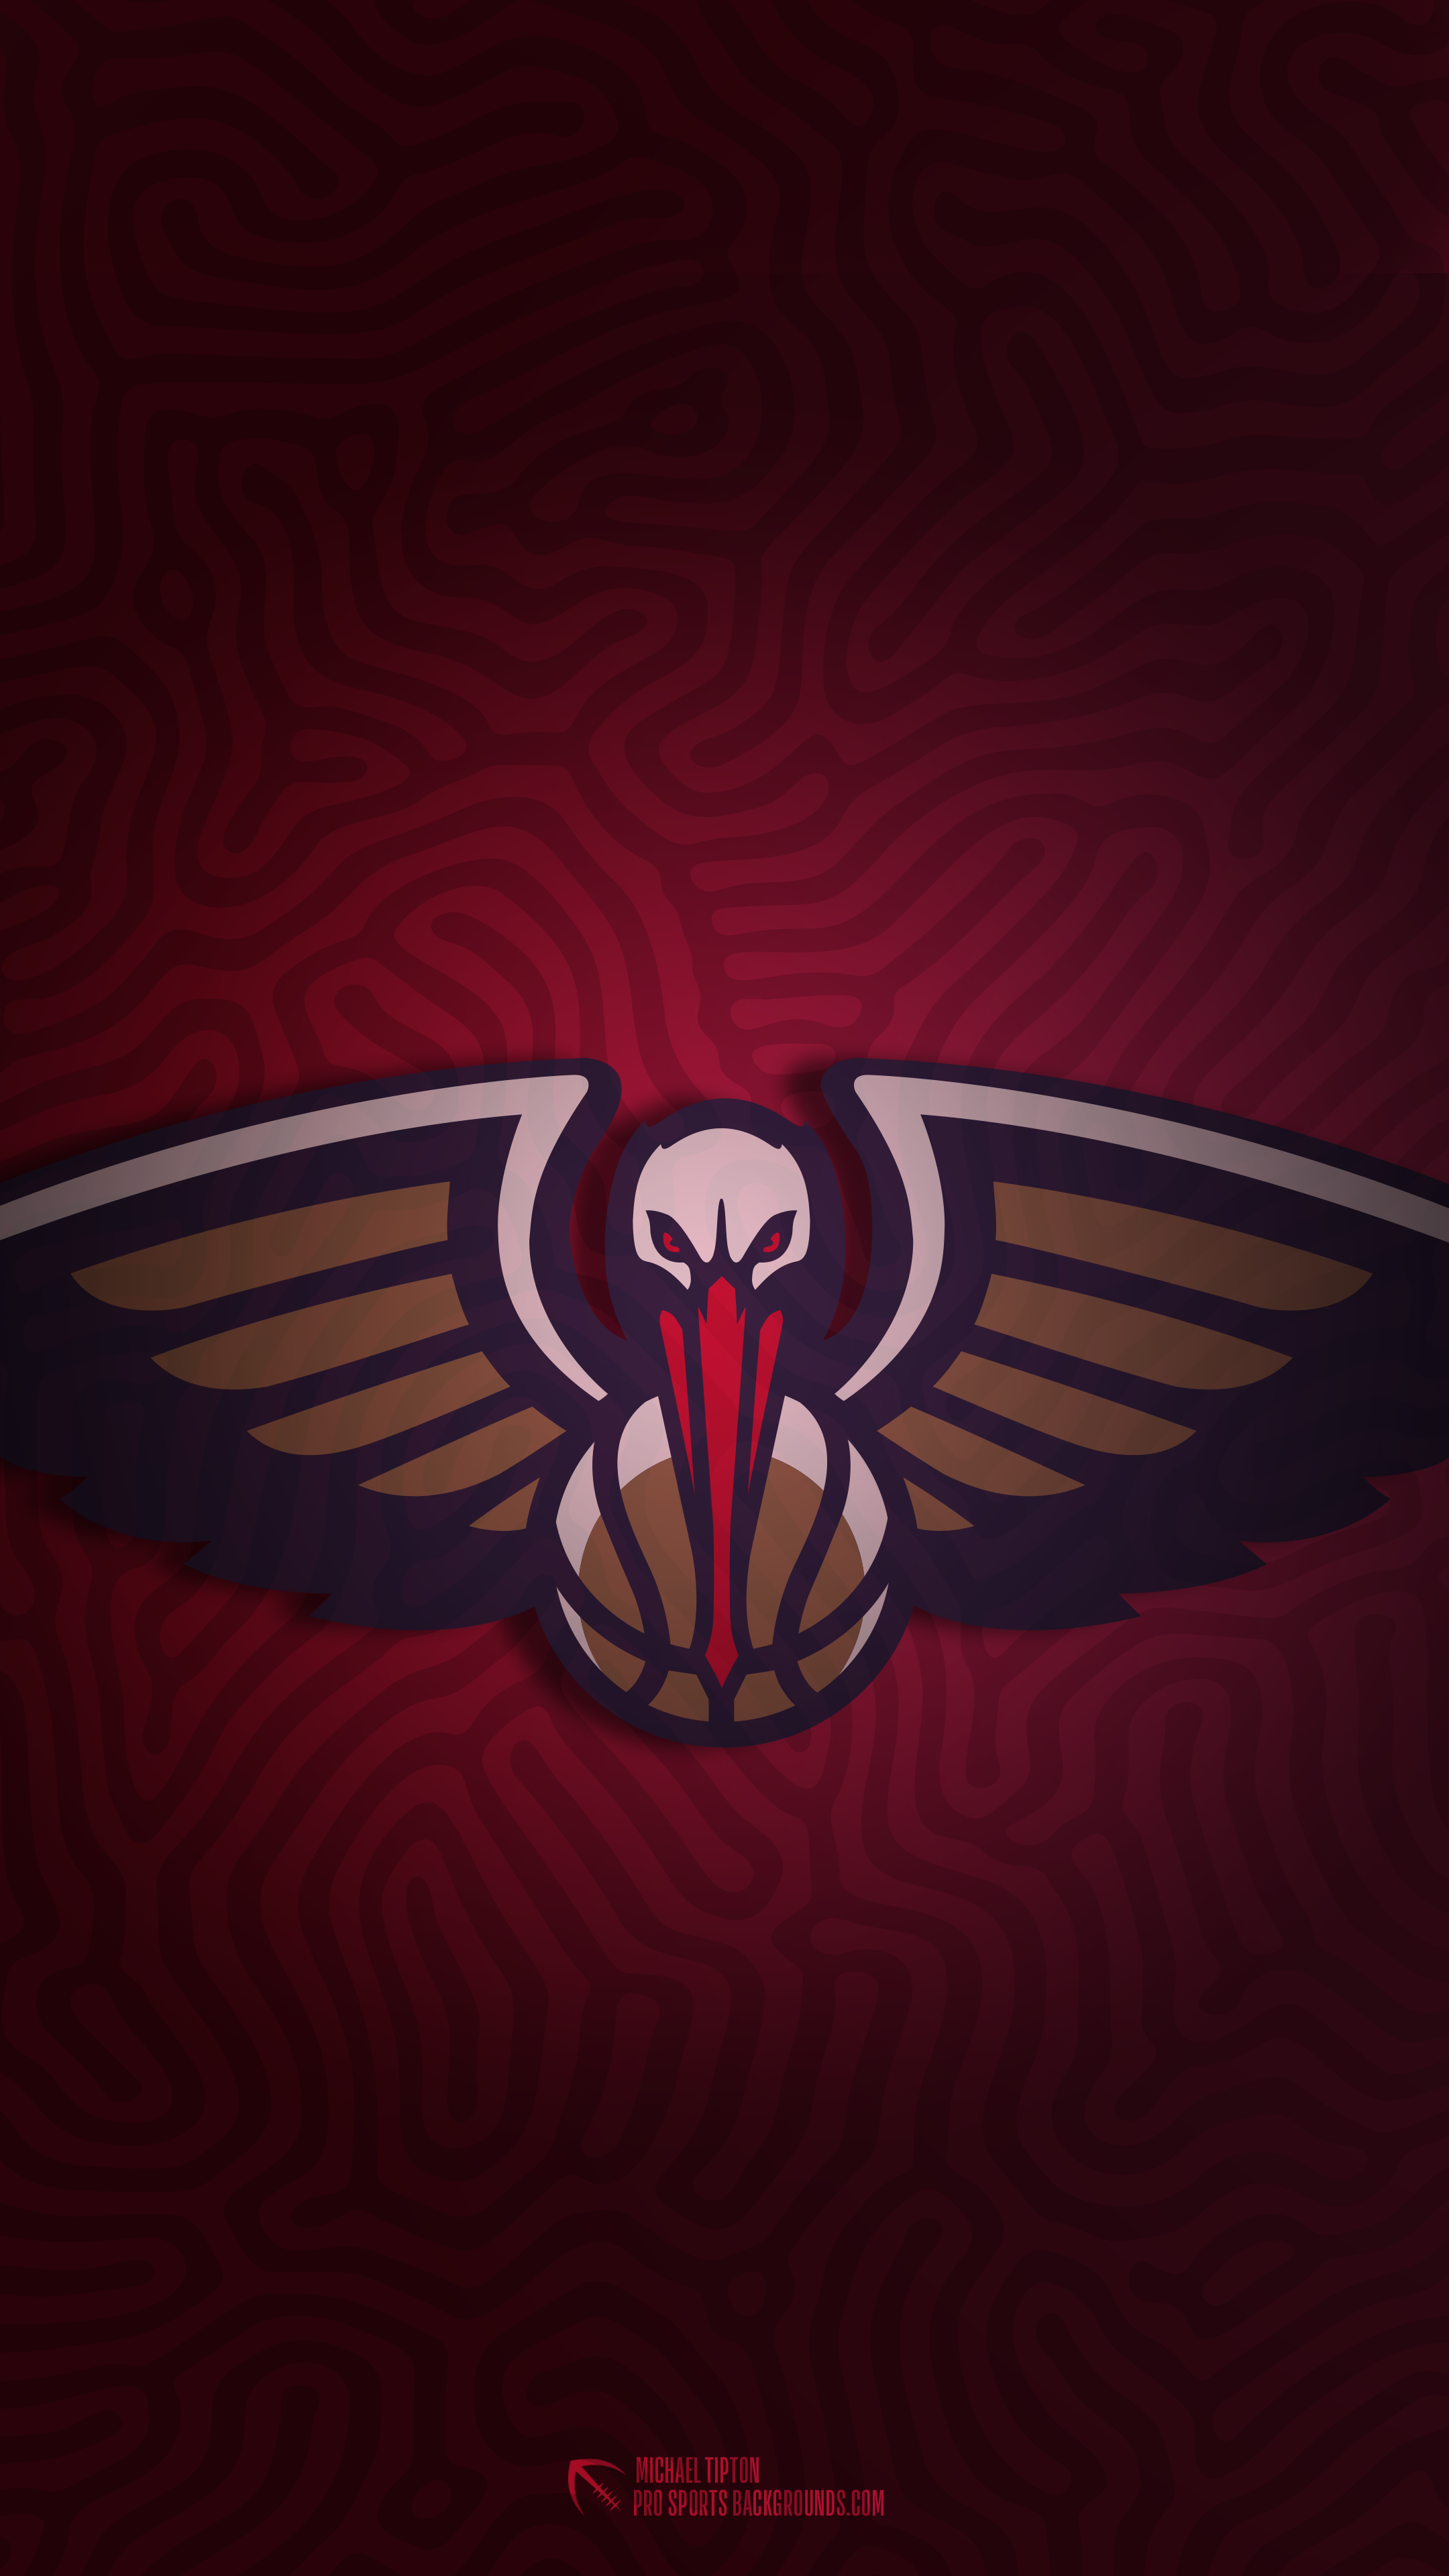 2023 New Orleans Pelicans wallpaper – Pro Sports Backgrounds